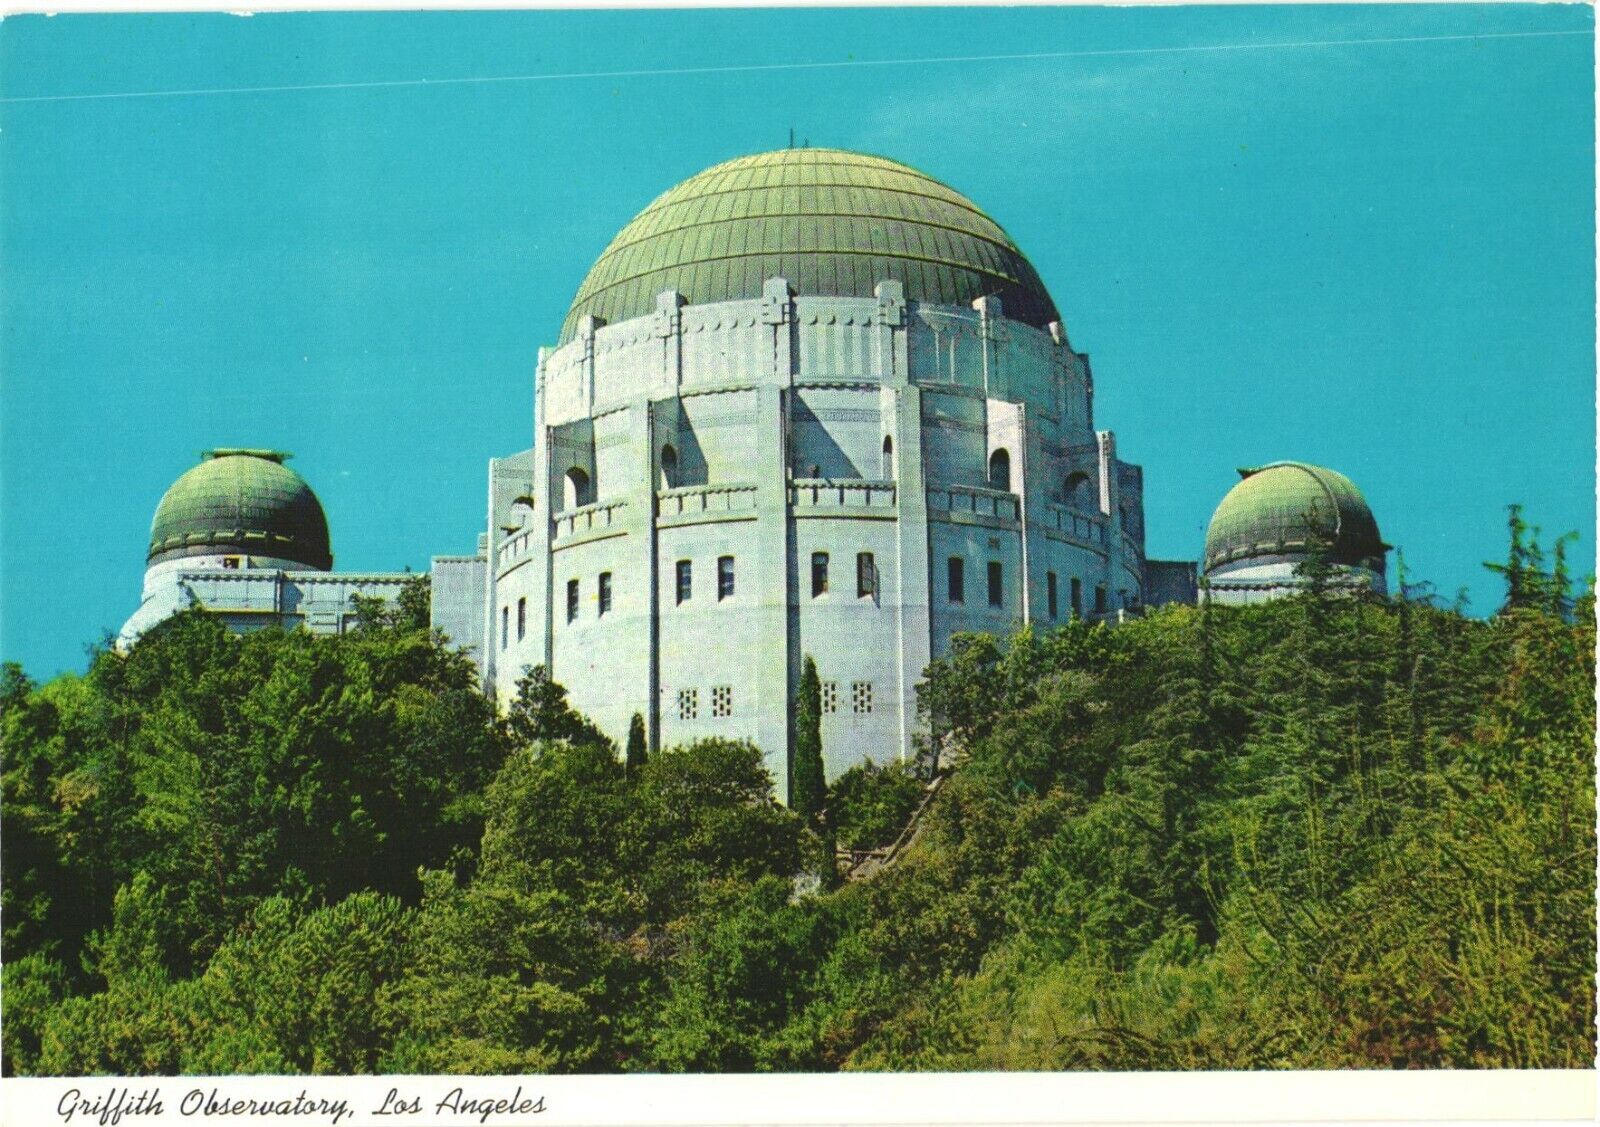 Solar Telescope & Twin Telescopes of Griffith Observatory, Los Angeles Postcard